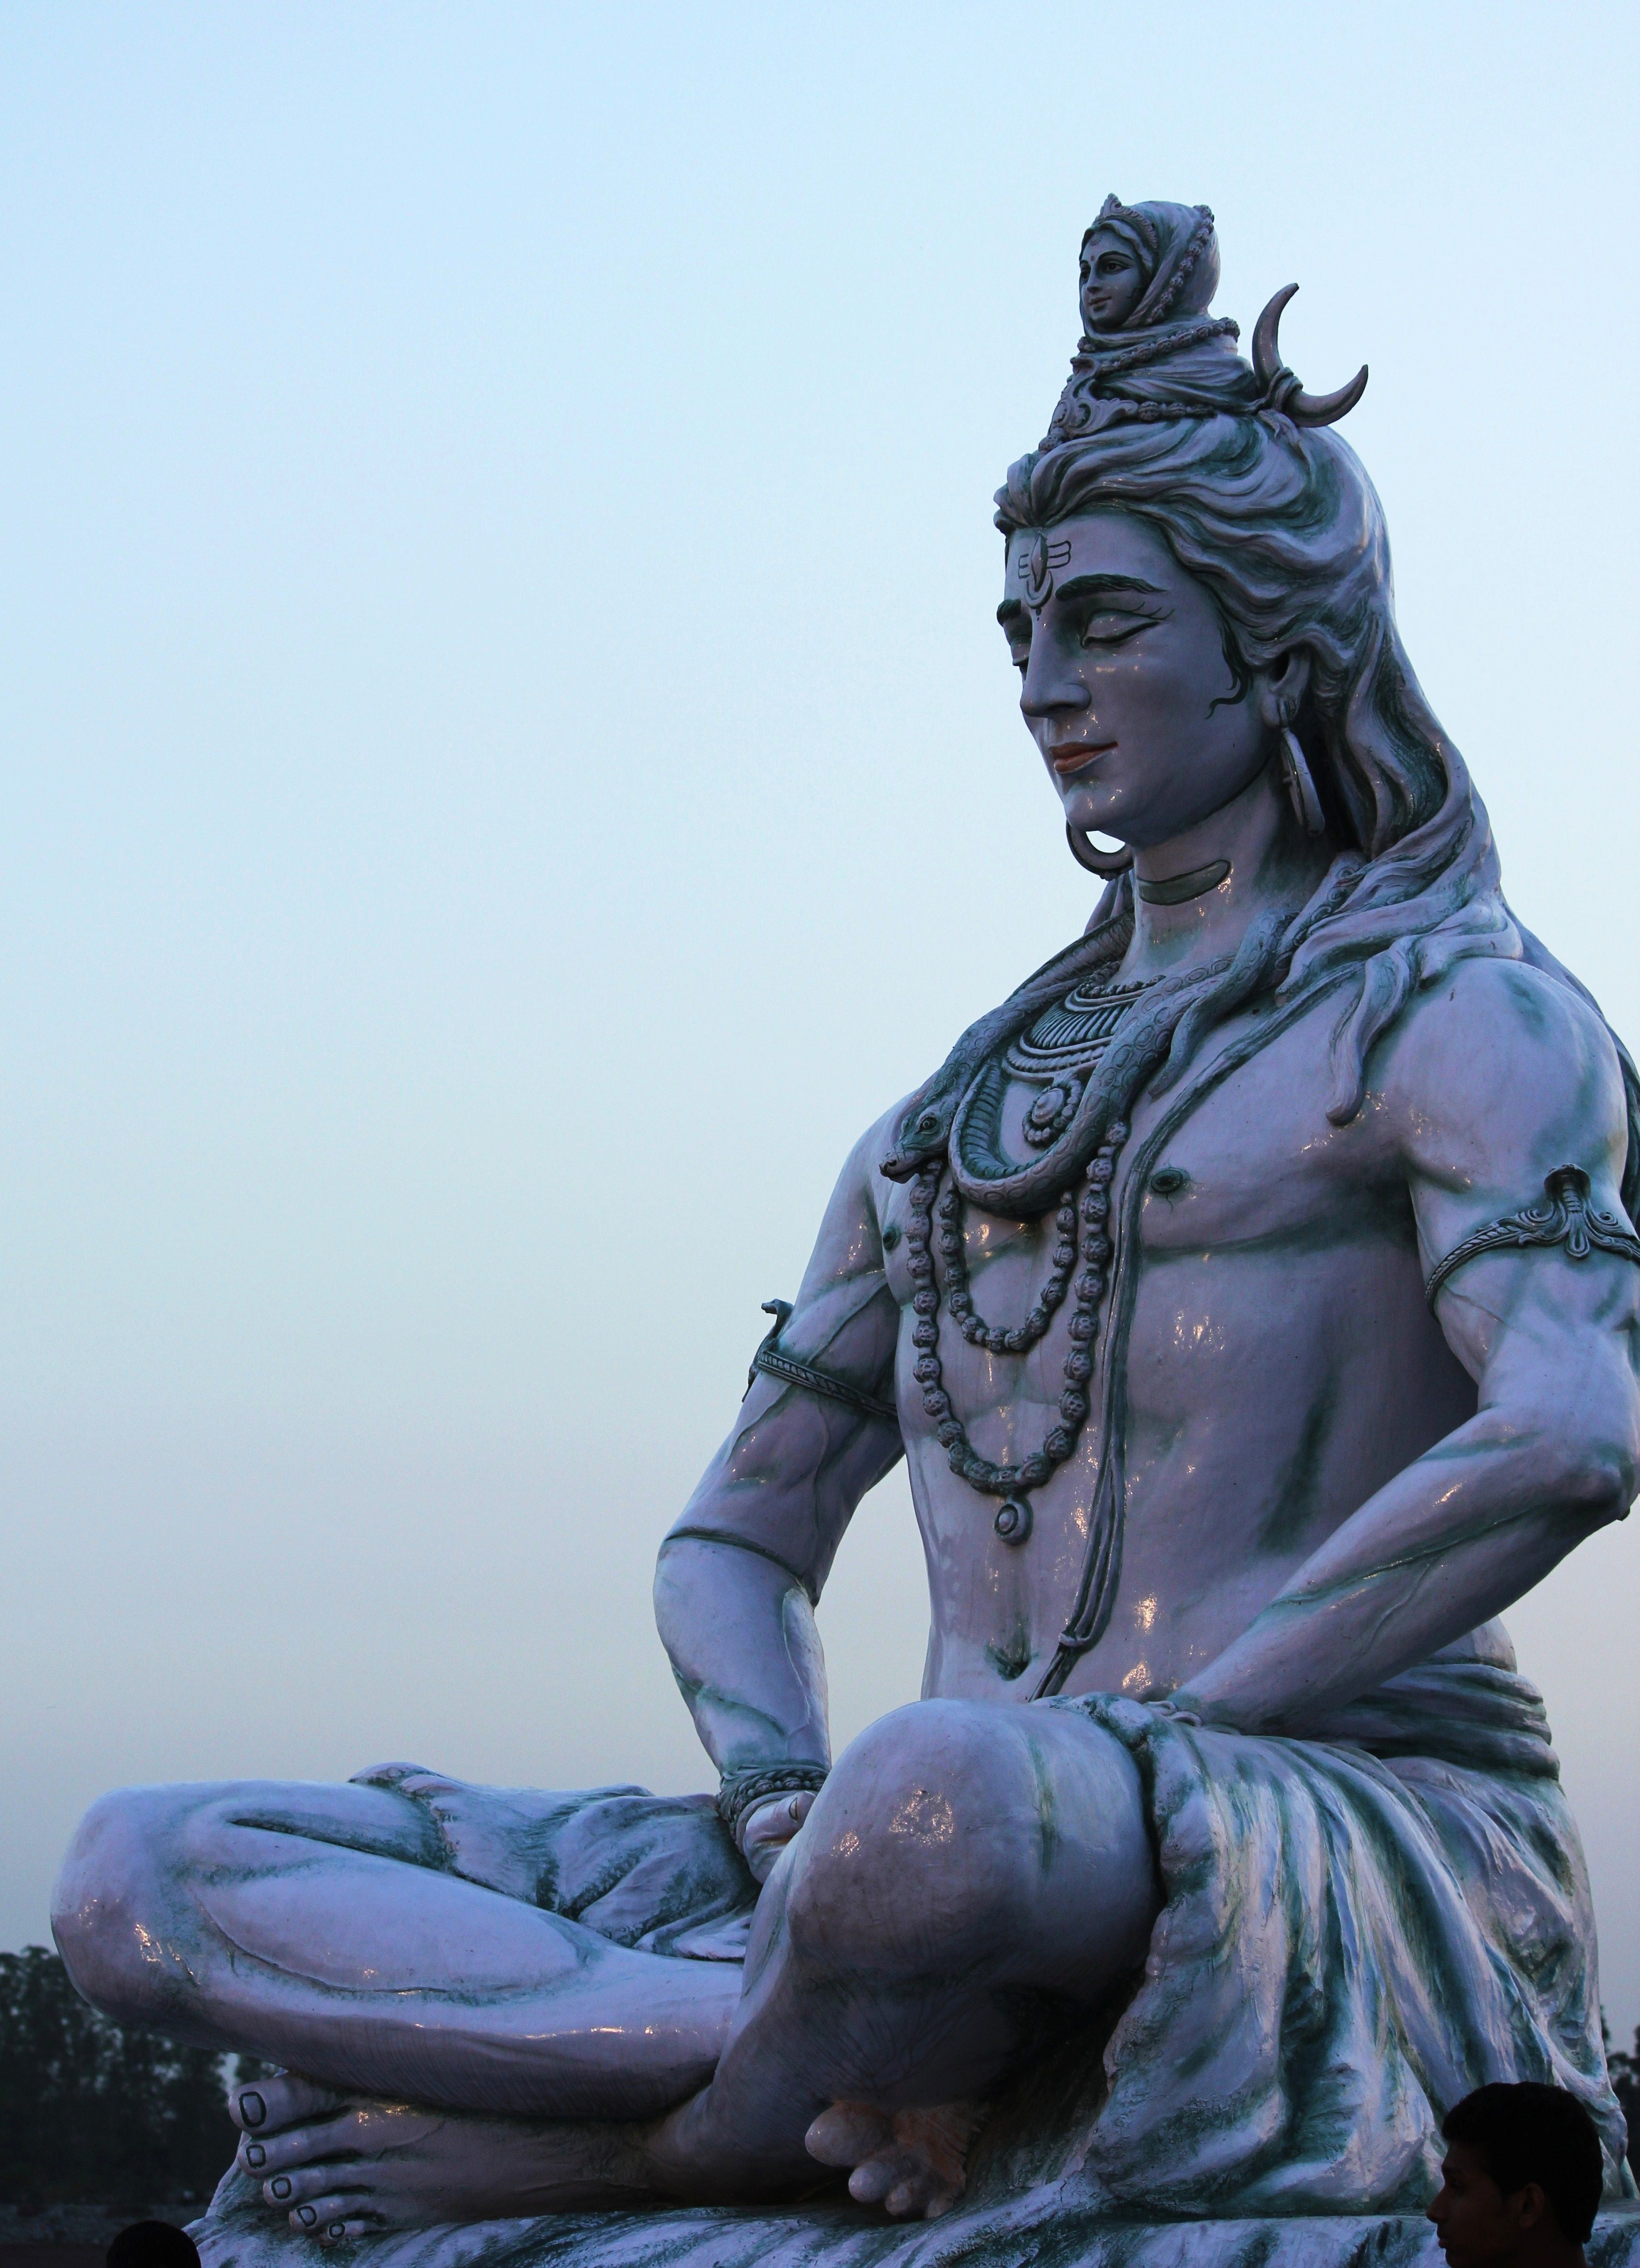 Lord Shiva Statue Wallpapers - Wallpaper Cave